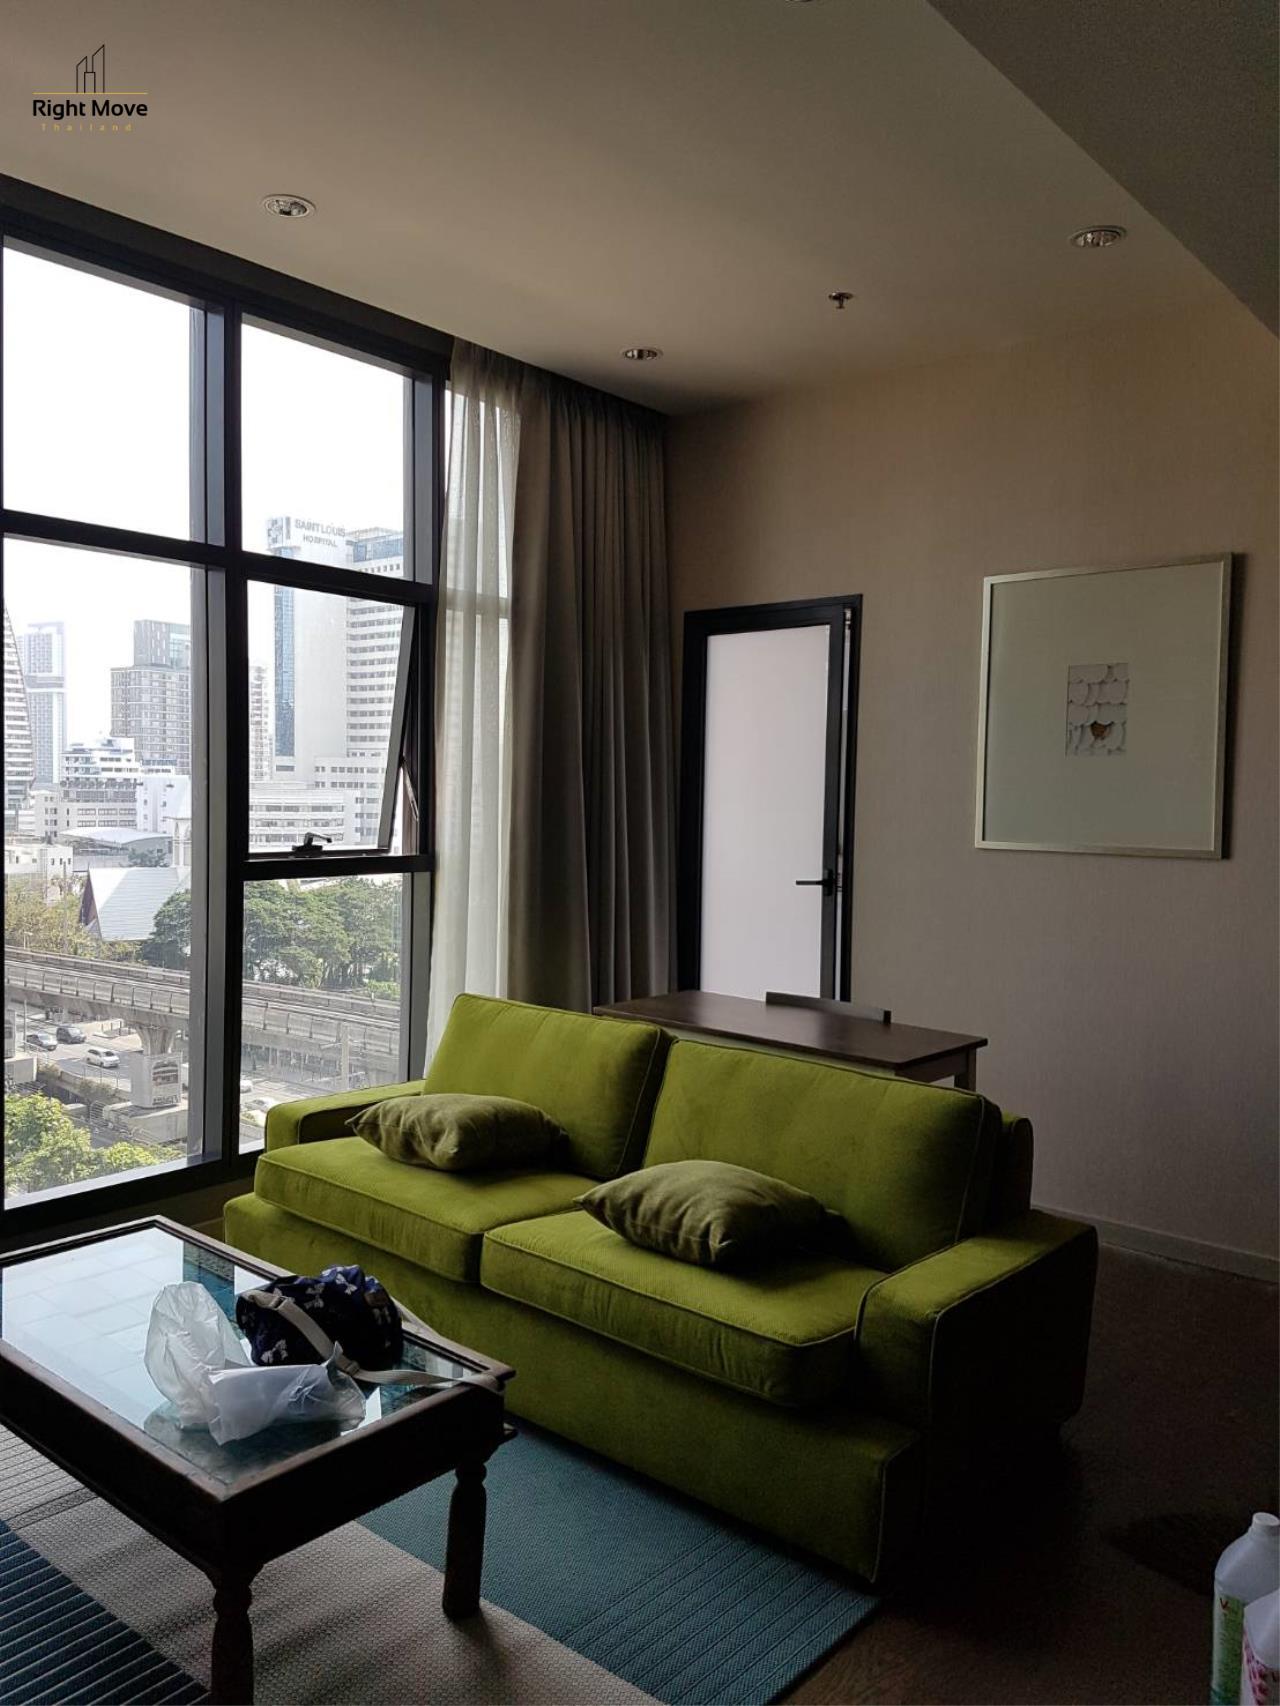 Right Move Thailand Agency's CA6879 The Diplomat Sathorn For Rent 40,000 THB For Sale 12,000,000 THB 1 Bedroom 51.77 Sqm 3